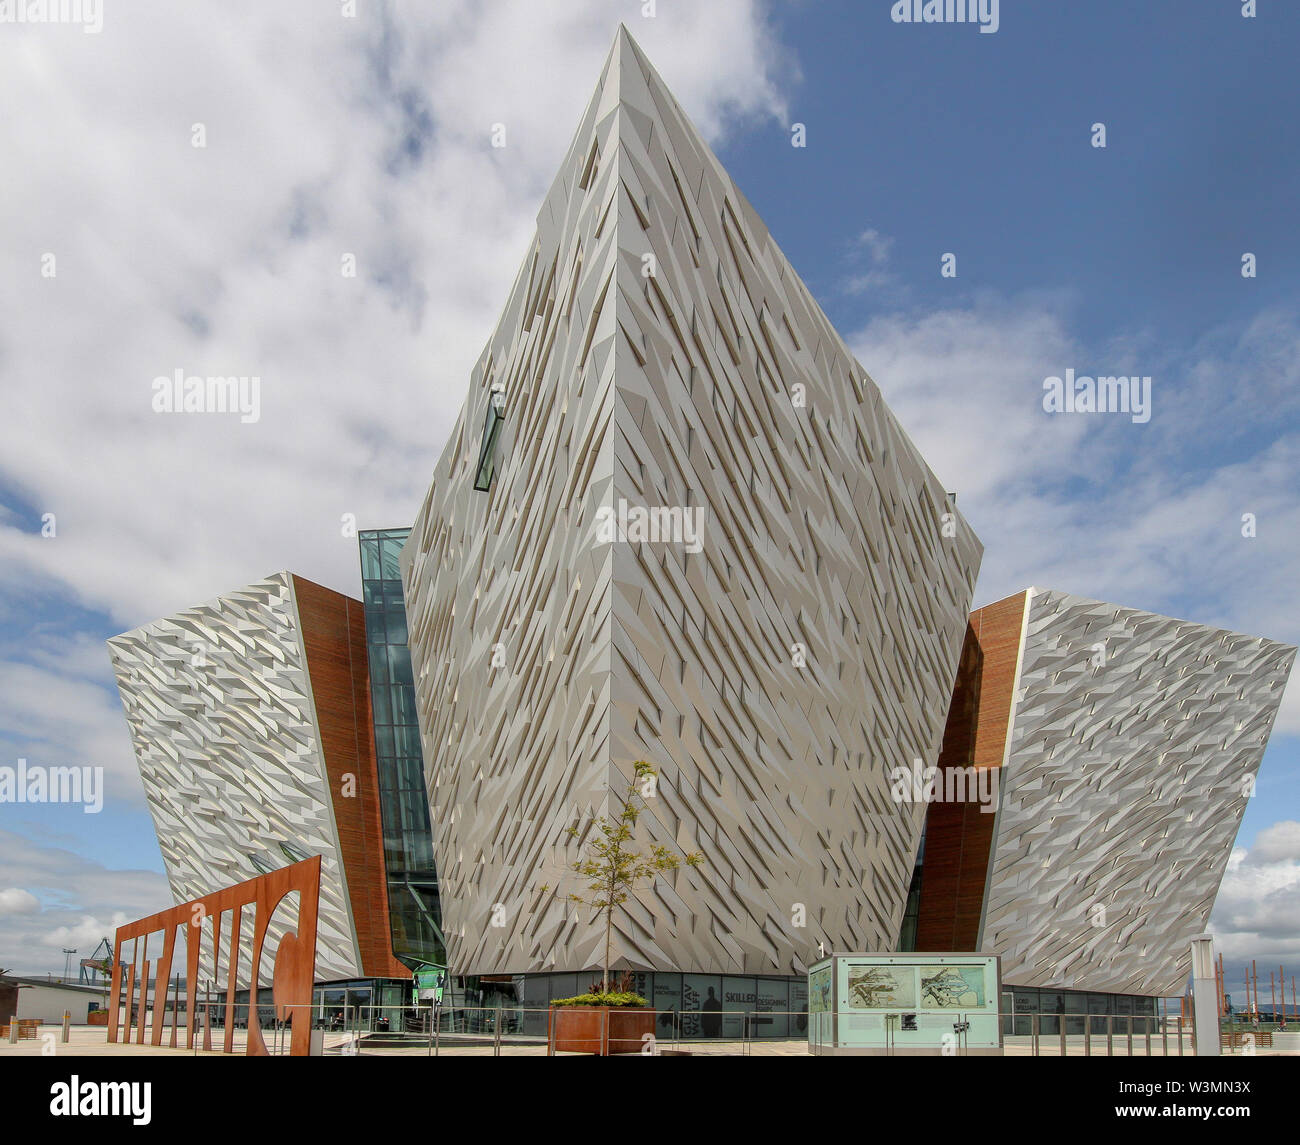 The three prows of Titanic Belfast in an exterior shot of The Titanic Centre, the internationally renowned visitor attraction centre in Belfast. Stock Photo